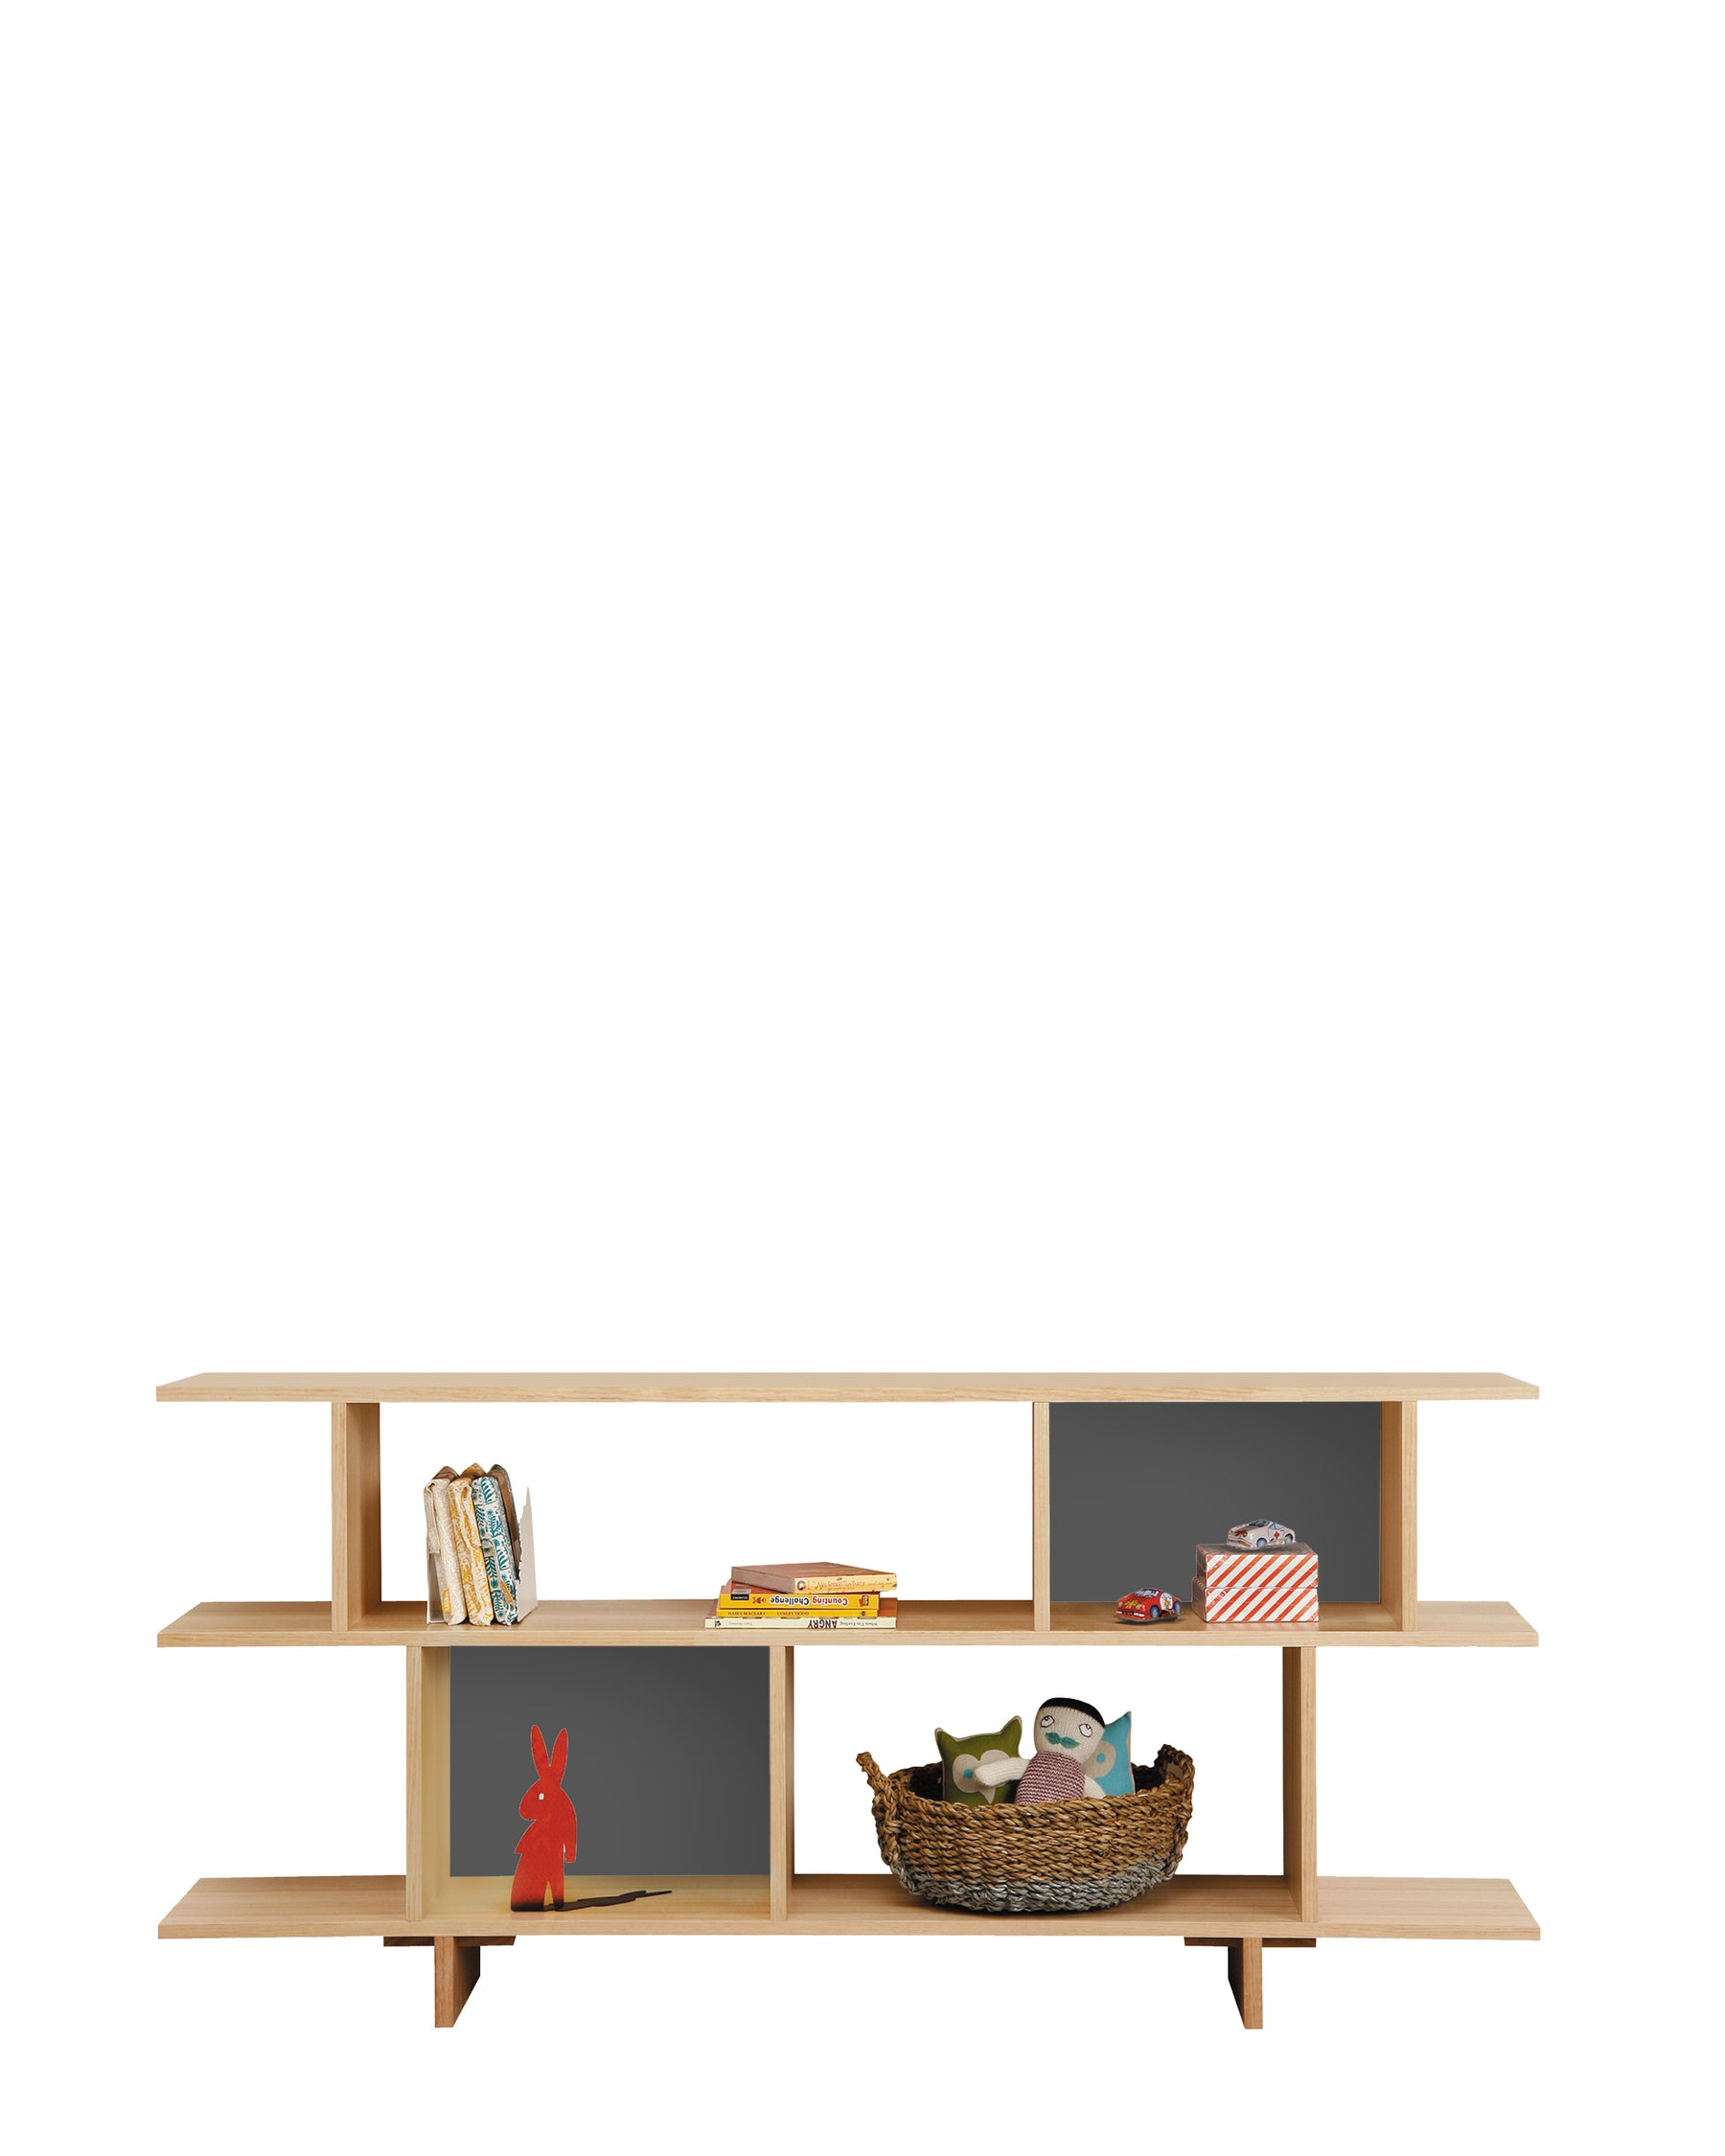 NED BOOKCASE 2 TIERED